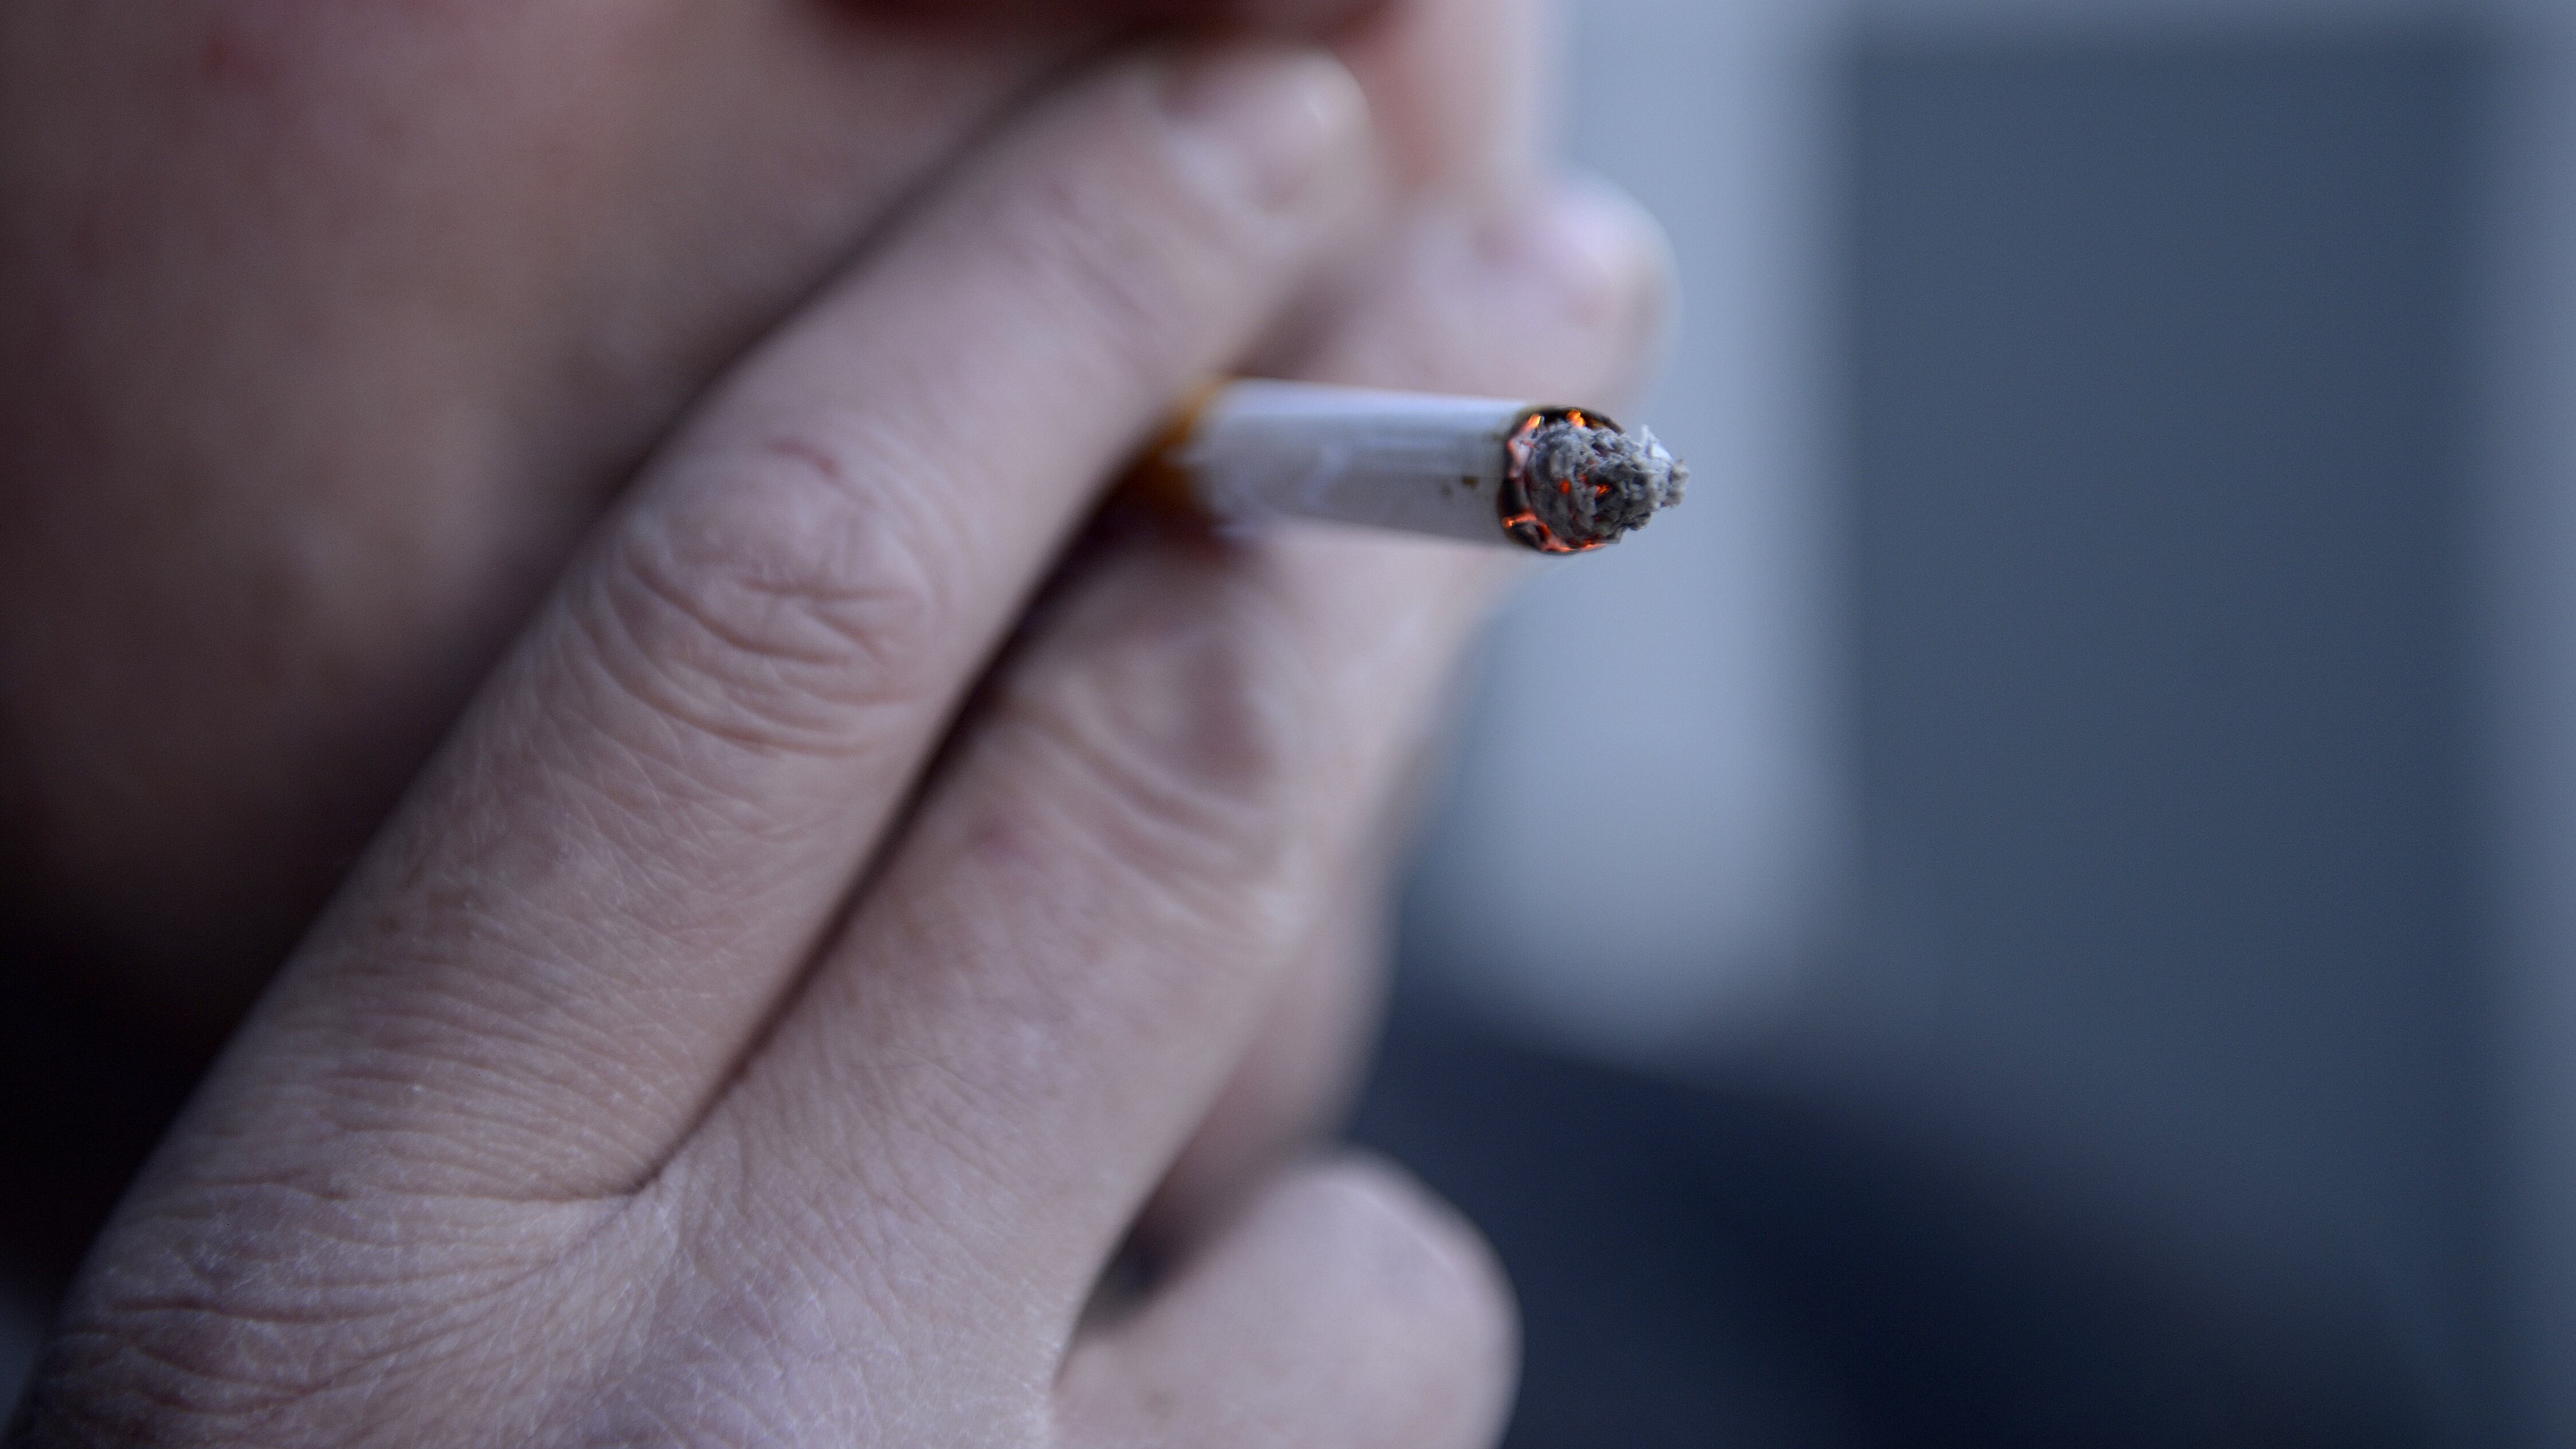 The decline in the number of cigarettes being smoked in England has ‘plateaued’, according to new analysis